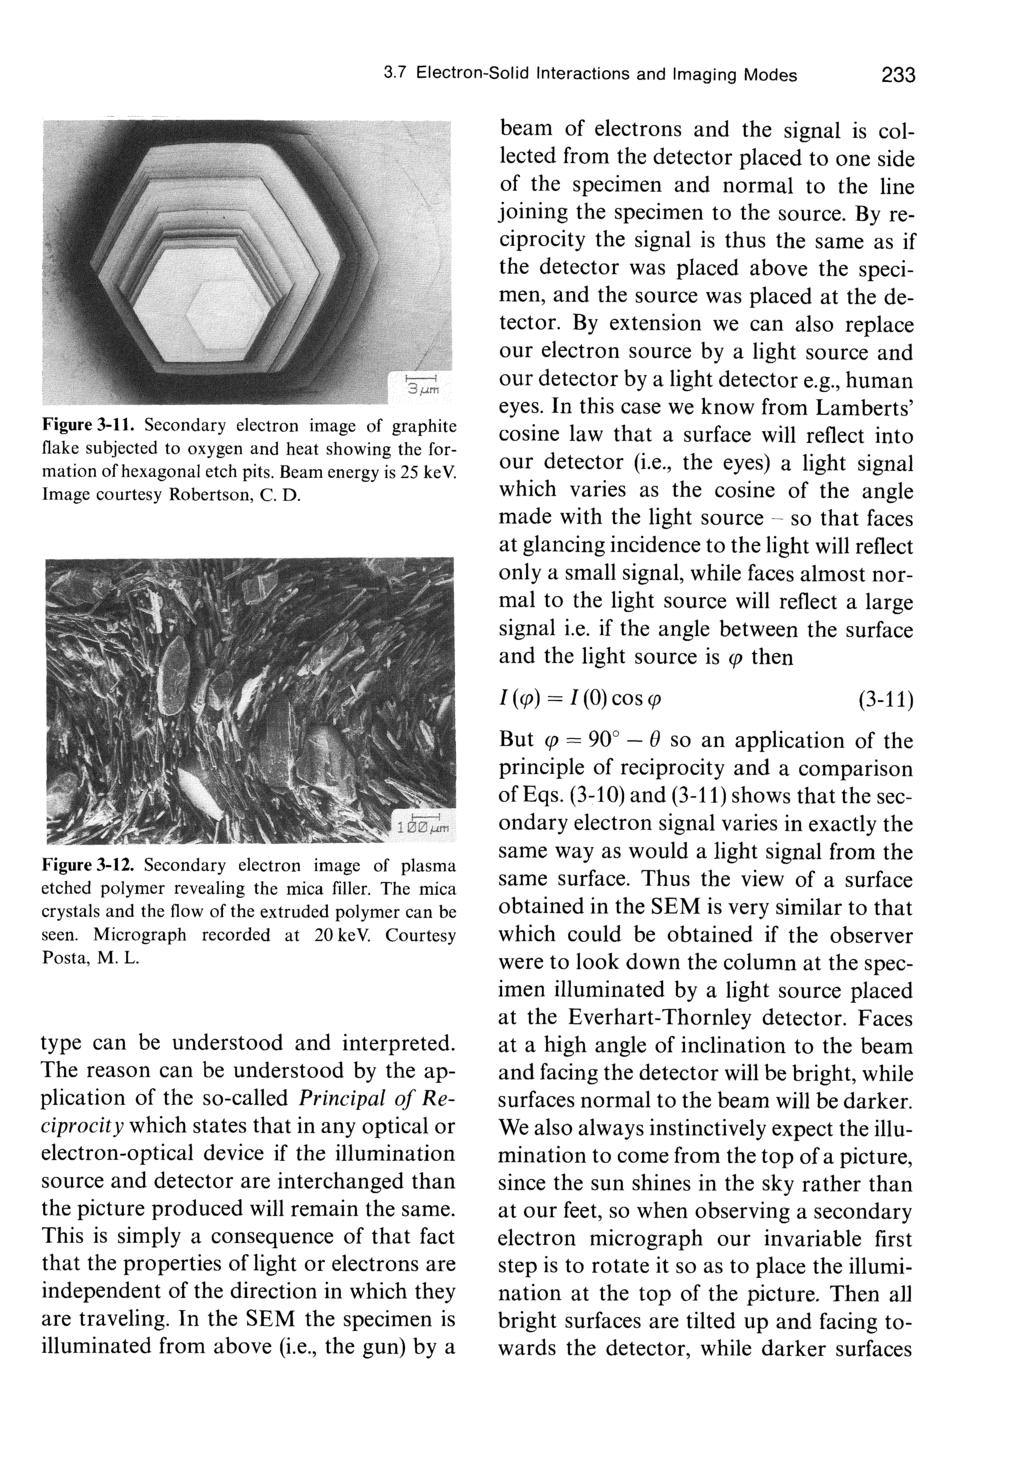 3.7 Electron-Solid Interactions and Imaging Modes 233 Figure 3-11. Secondary electron image of graphite flake subjected to oxygen and heat showing the formation of hexagonal etch pits.